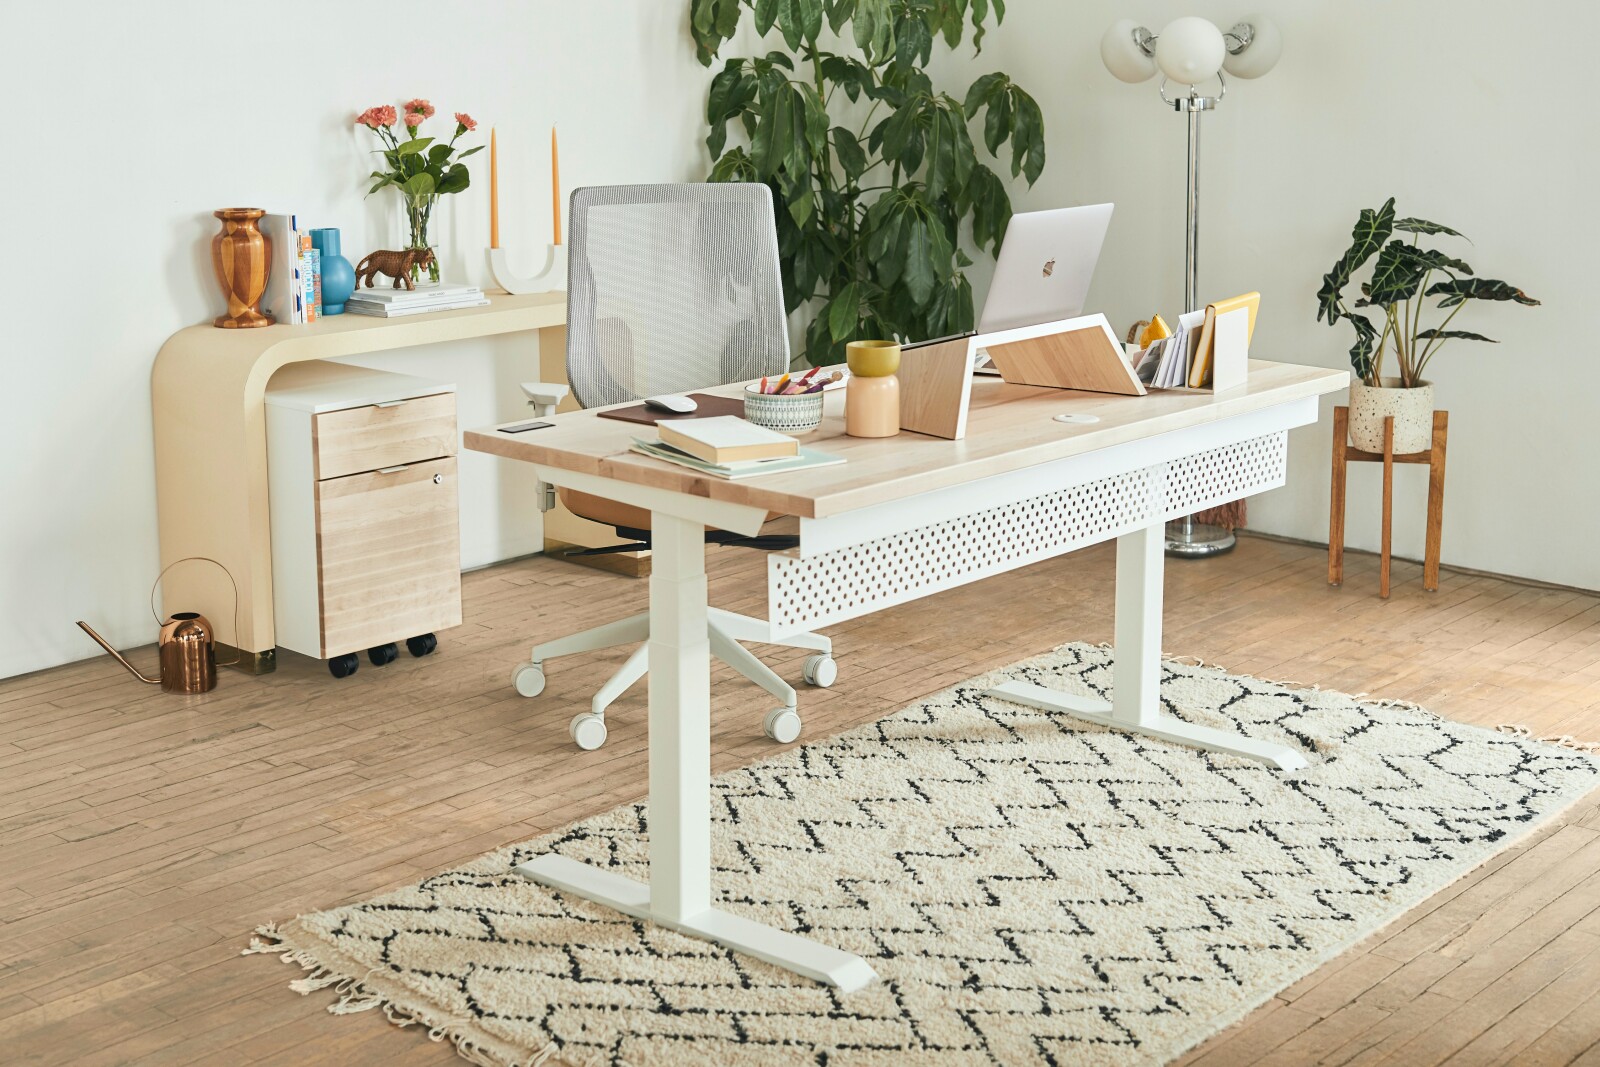 How to Create a Home Office You Love